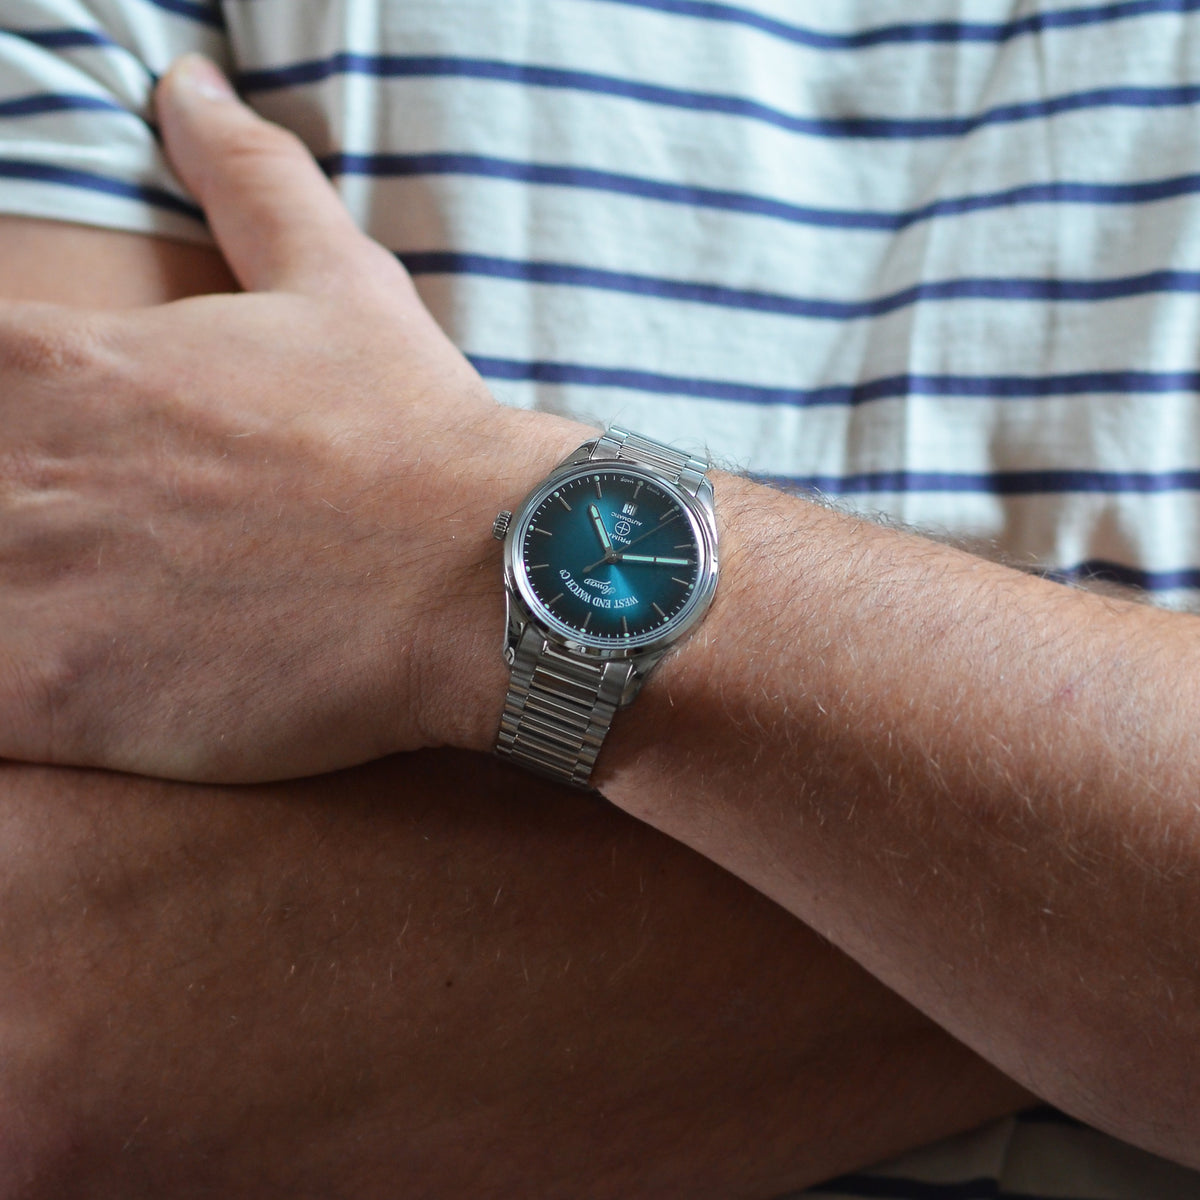 West End Watch Co., Sowar Steel, Turquoise dial, 